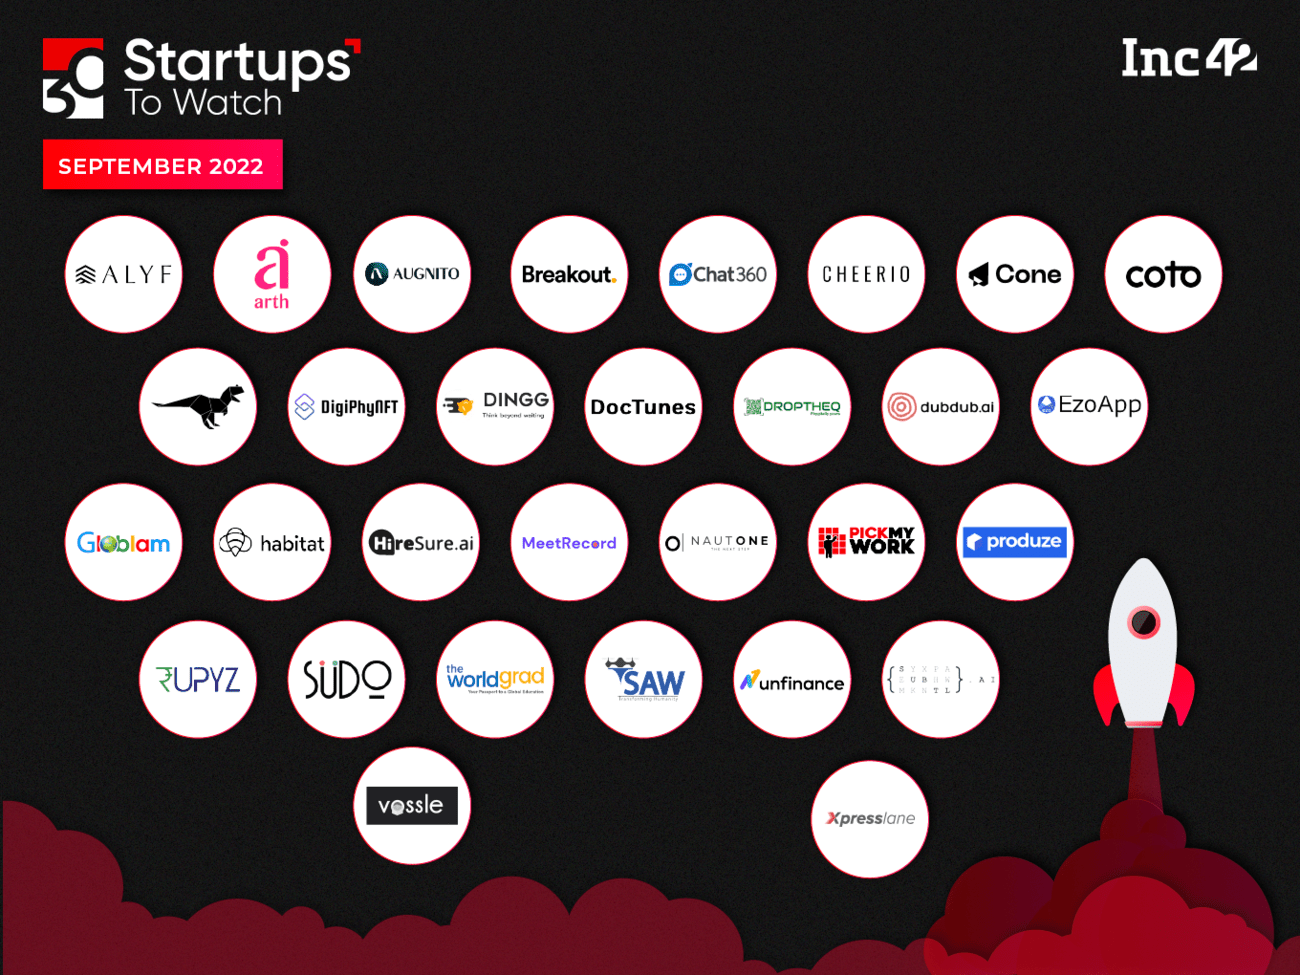 30 Startups To Watch: Startups That Caught Inc42’s Attention